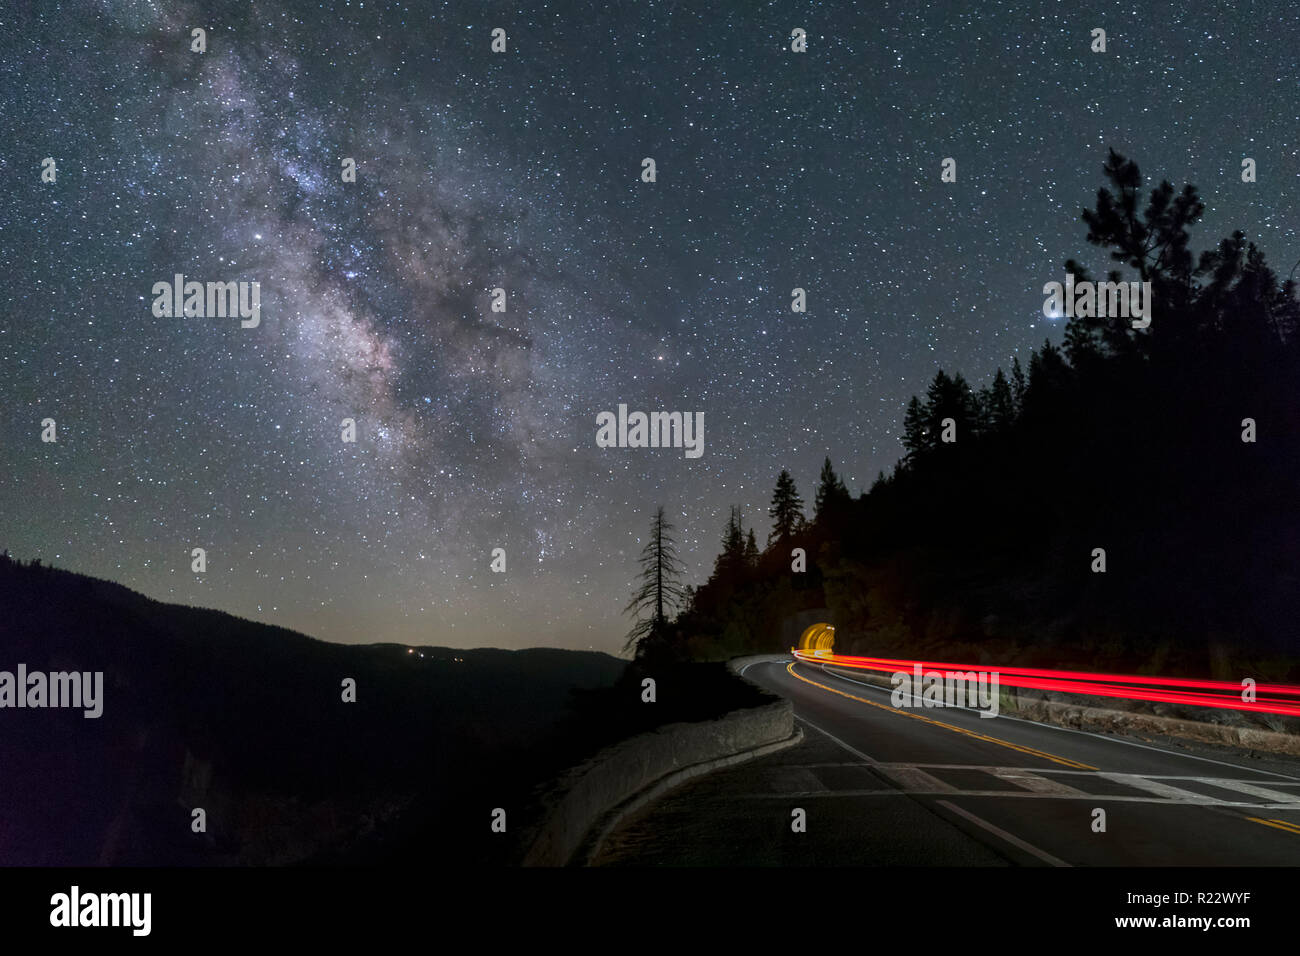 Under a night sky with Milky Way above, auto taillights streak through the scene and into a tunnel on Big Oak Flat Road in Yosemite National Park, CA. Stock Photo